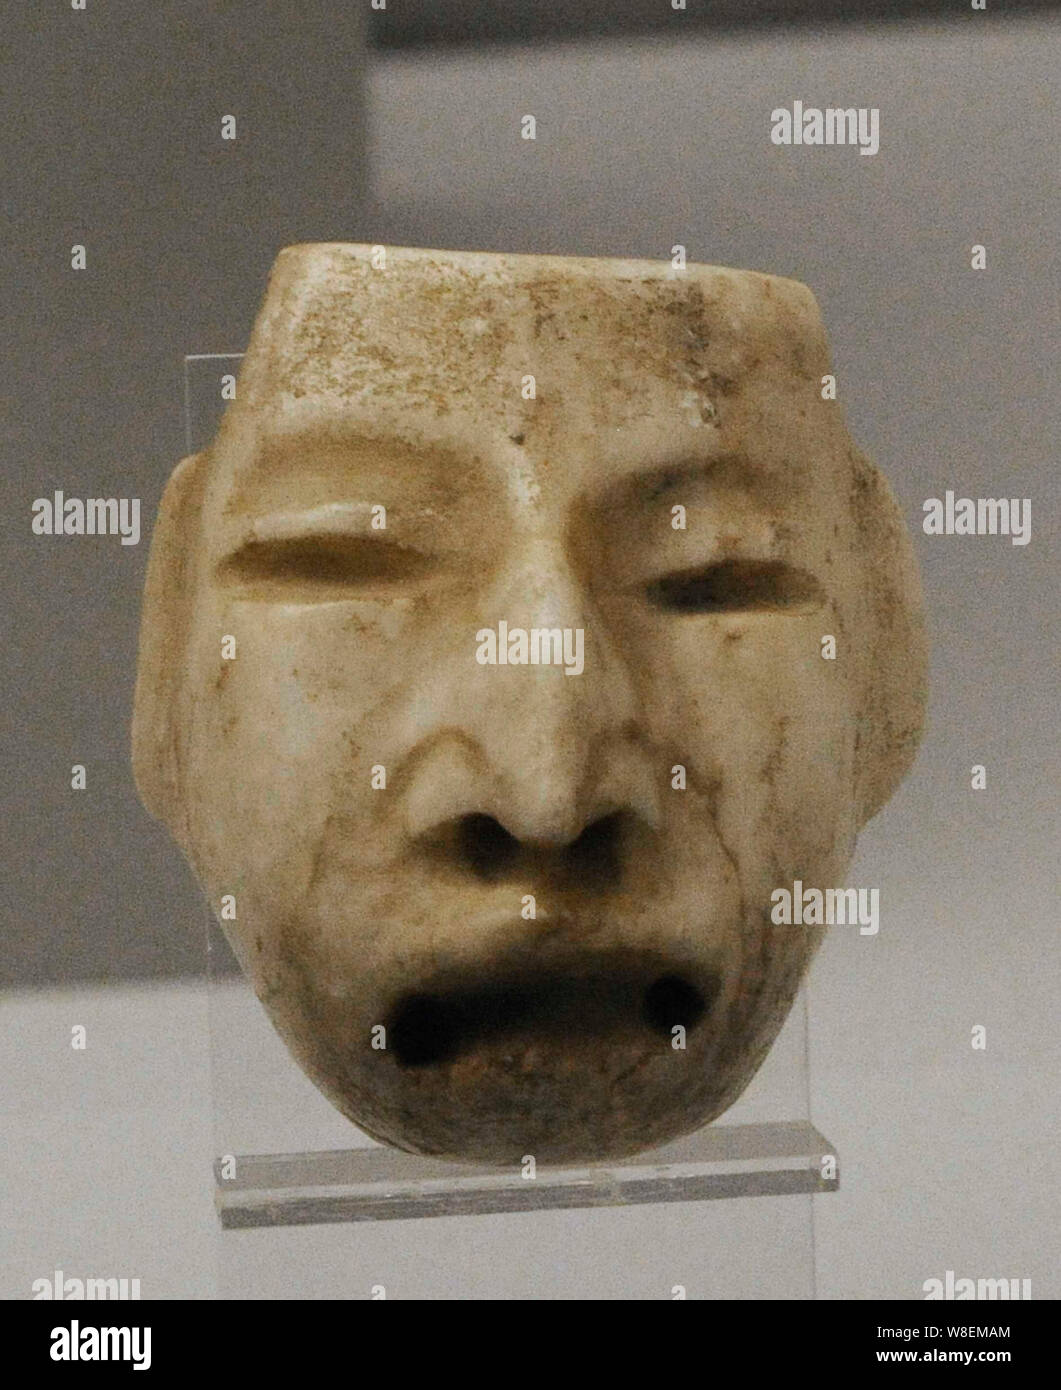 Mask with human features. White marble. Olmec culture. Middle Preclassic Period (1200-400 BC). Mexico, Gulf Coast. Museum of the Americas. Madrid, Spain. Stock Photo